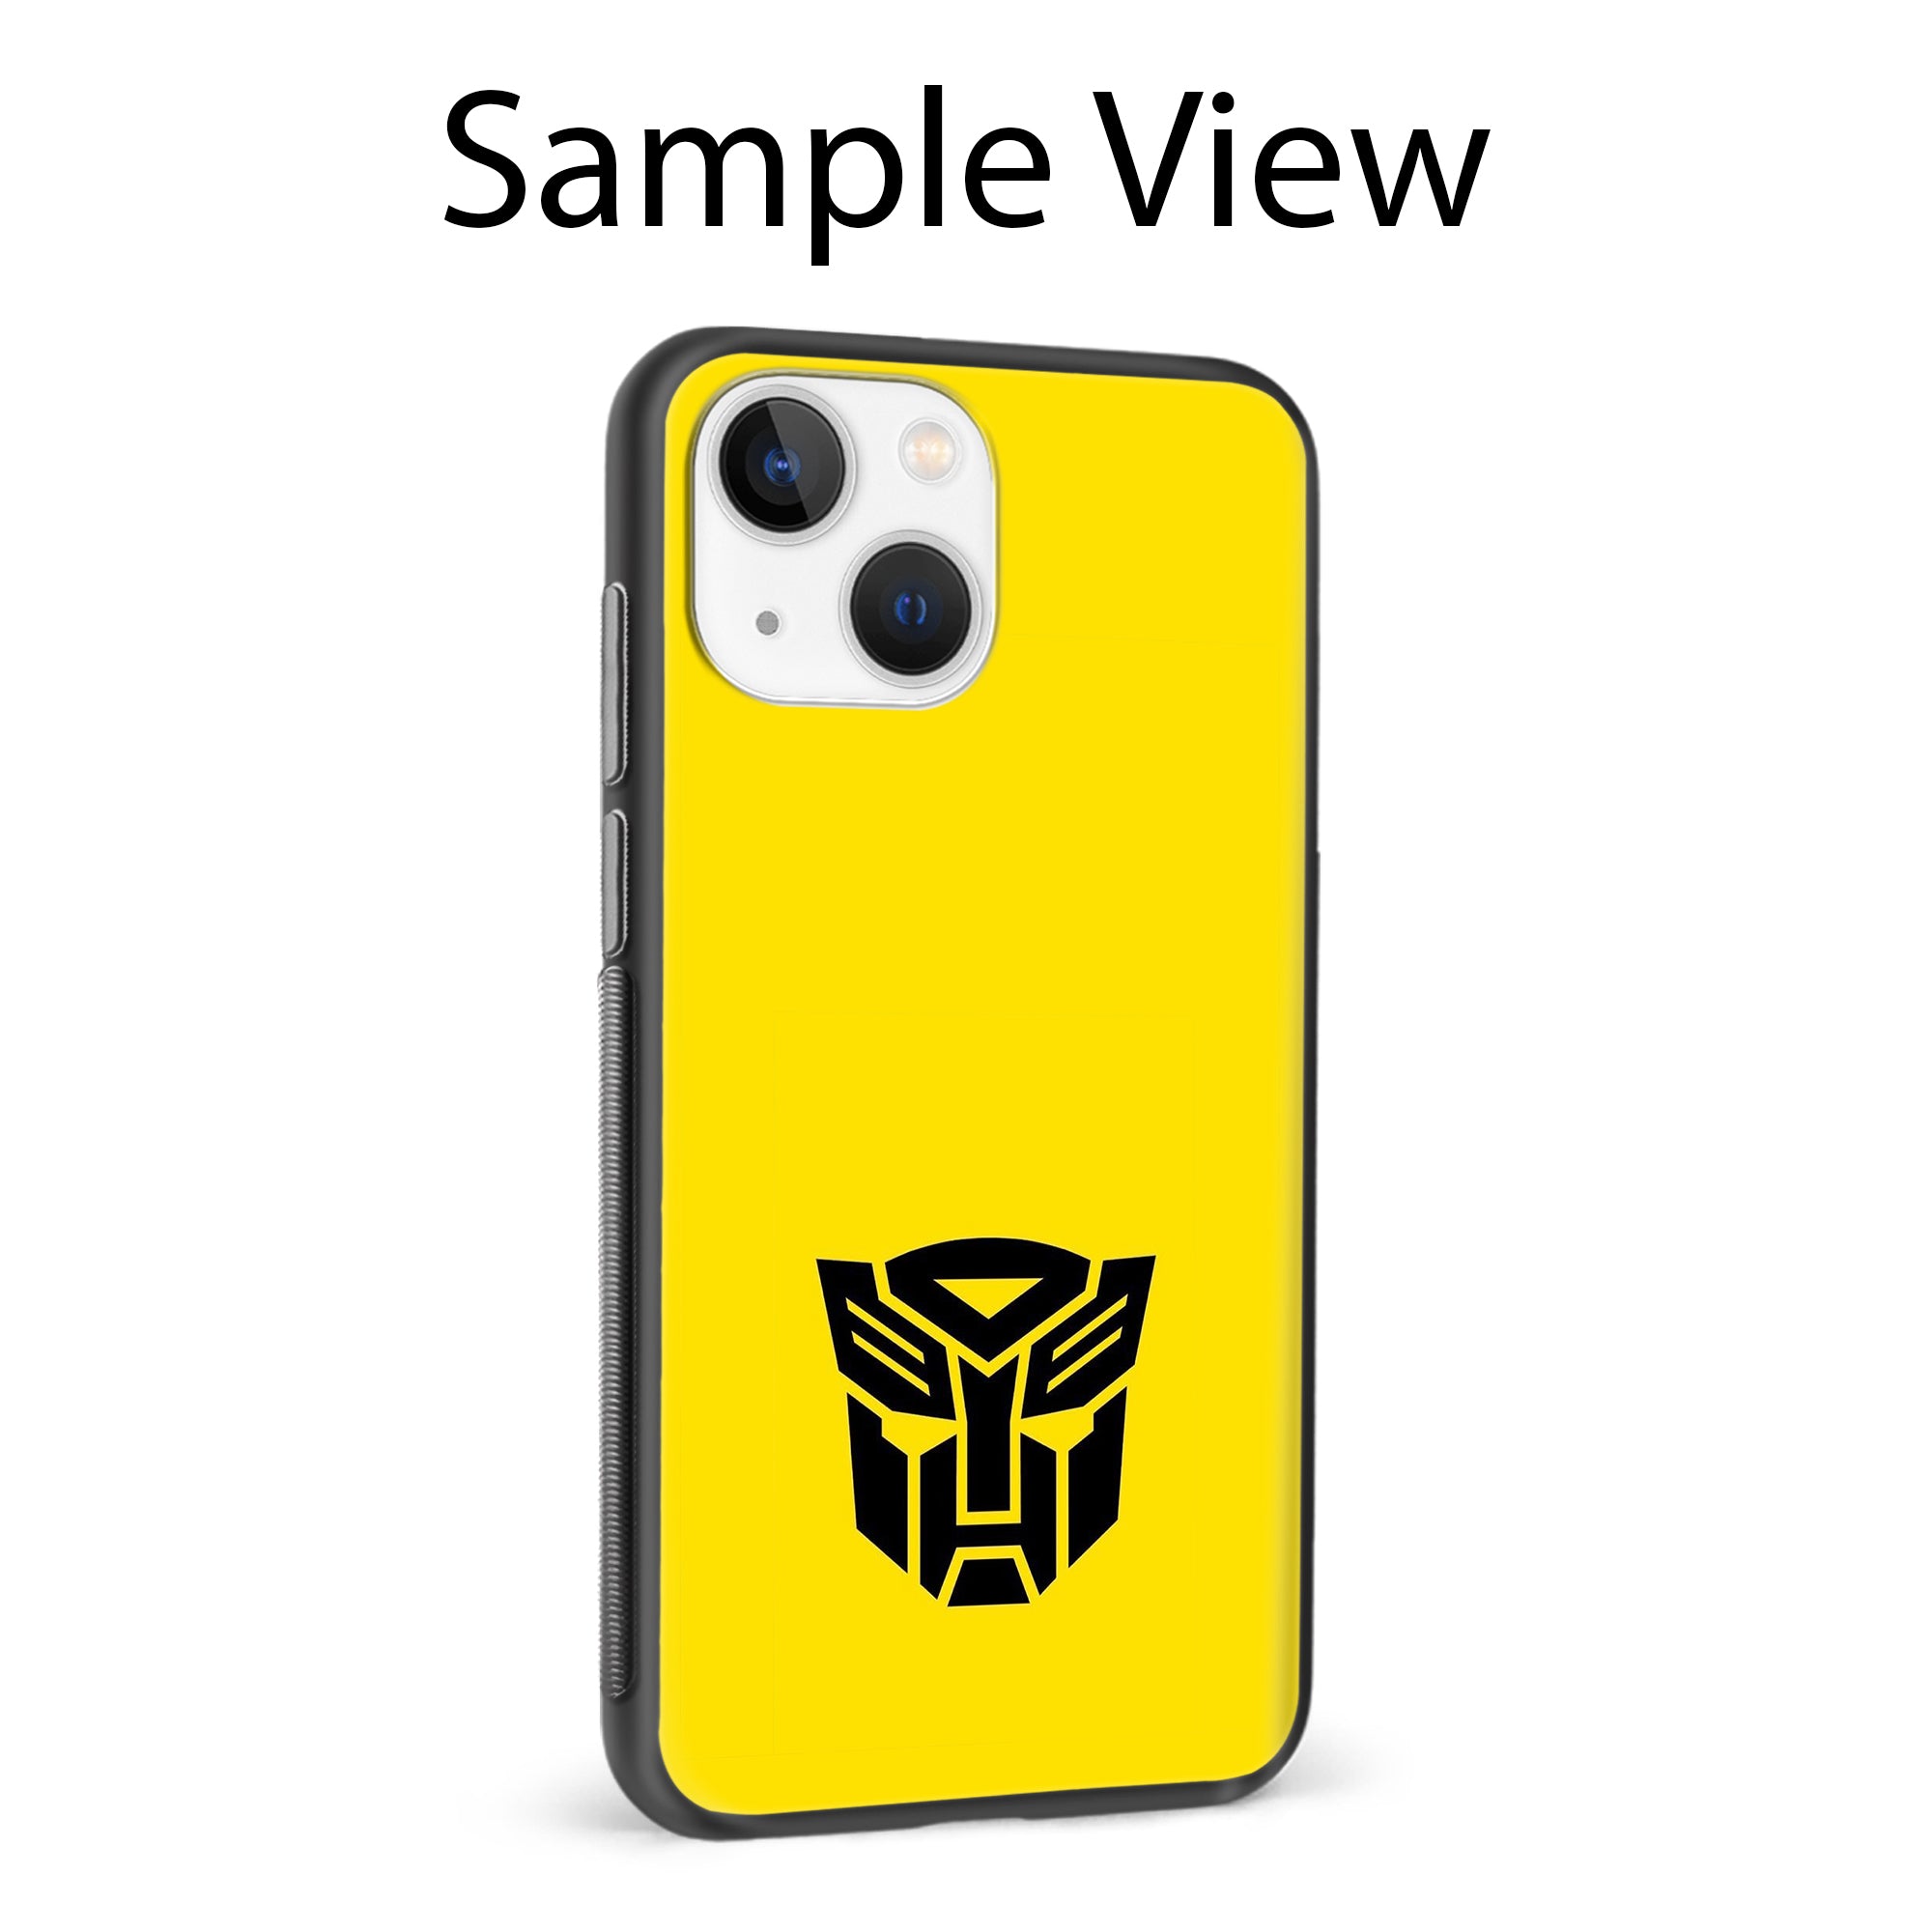 Buy Transformer Logo Metal-Silicon Back Mobile Phone Case/Cover For Samsung Galaxy S20 Ultra Online